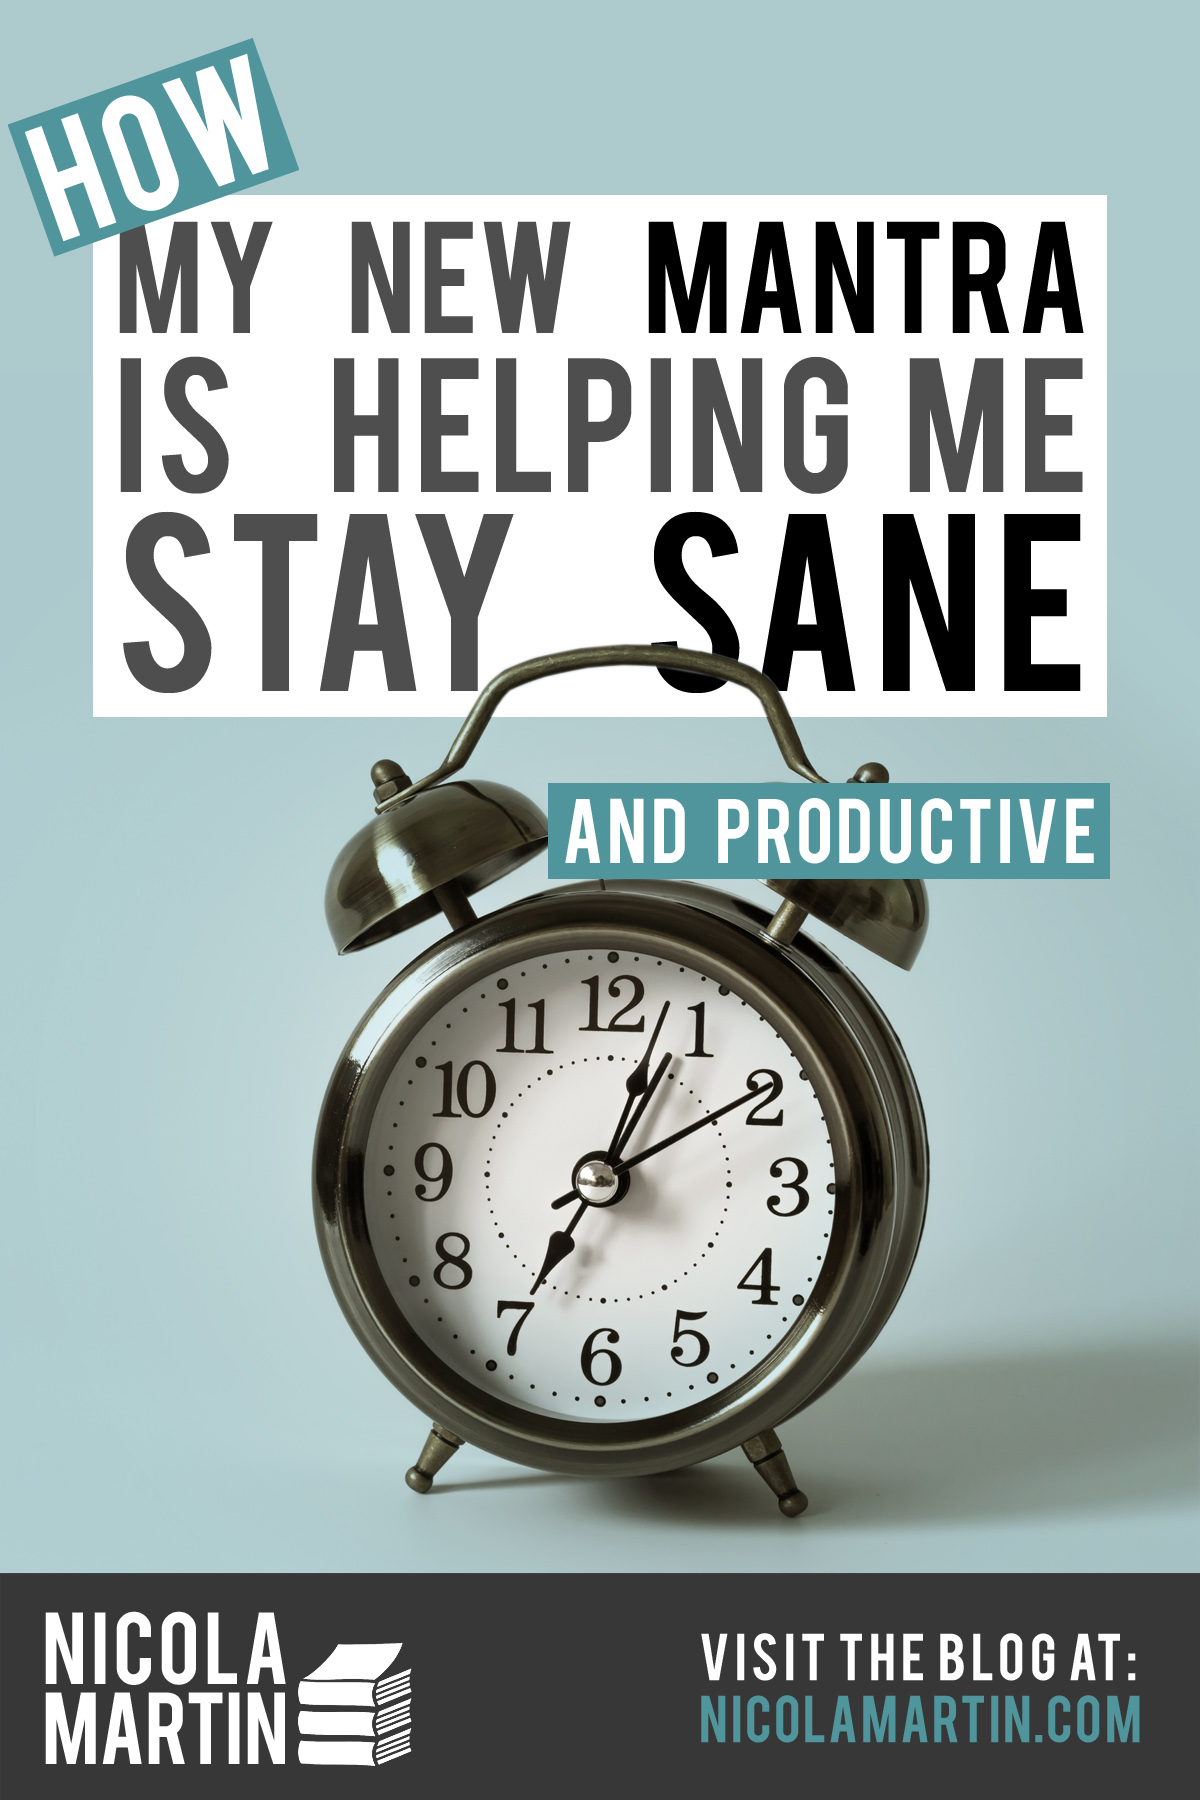 How my new mantra is helping me stay sane (and productive)